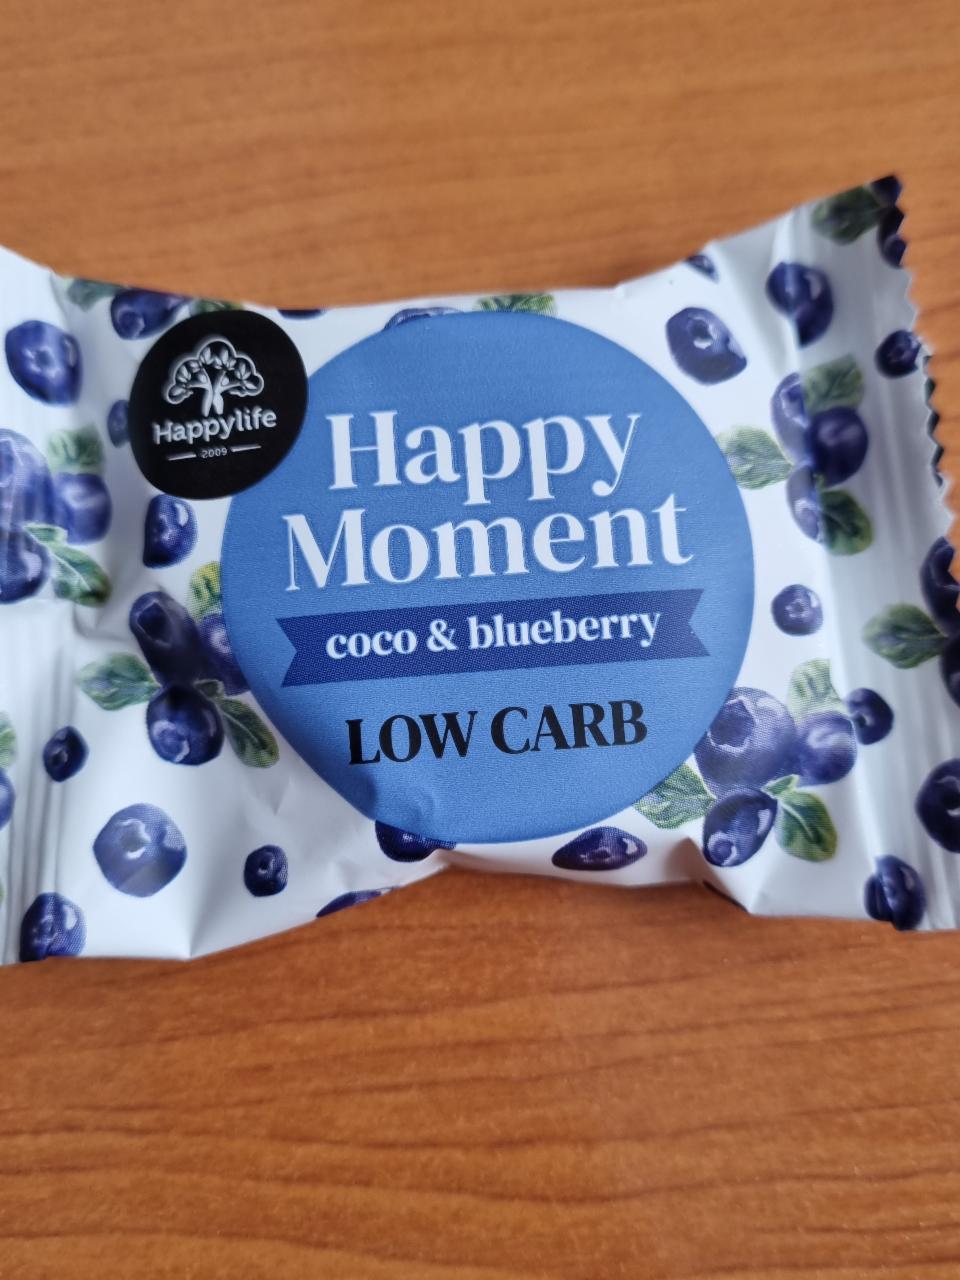 Fotografie - Happy Moment coco & blueberry Low Carb